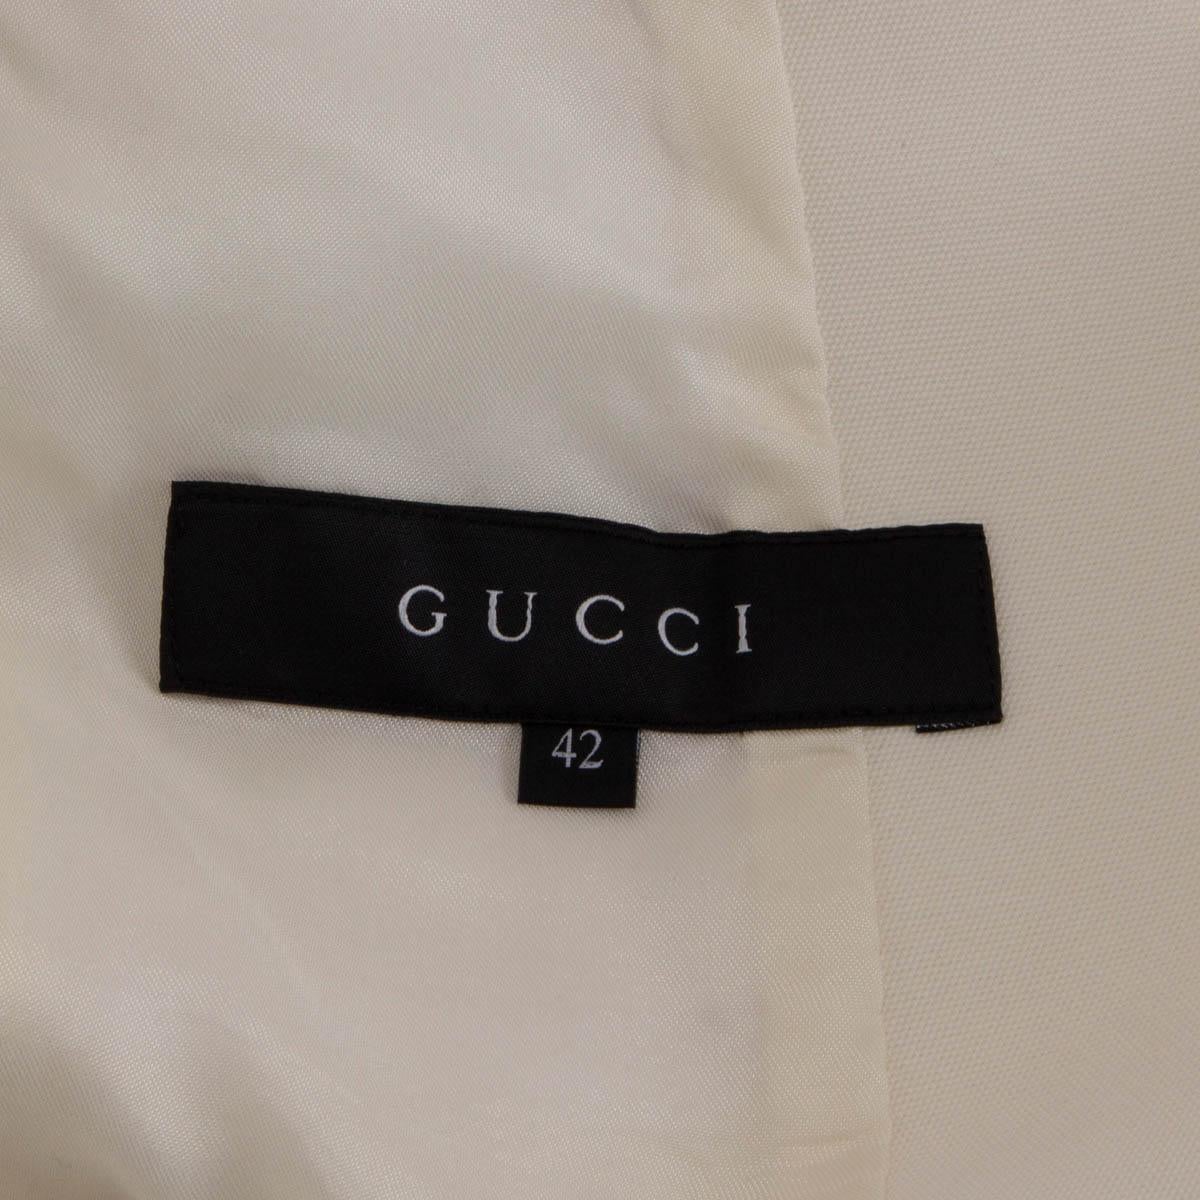 GUCCI ivory white cotton CLASSIC Blazer Jacket 42 M In Excellent Condition For Sale In Zürich, CH